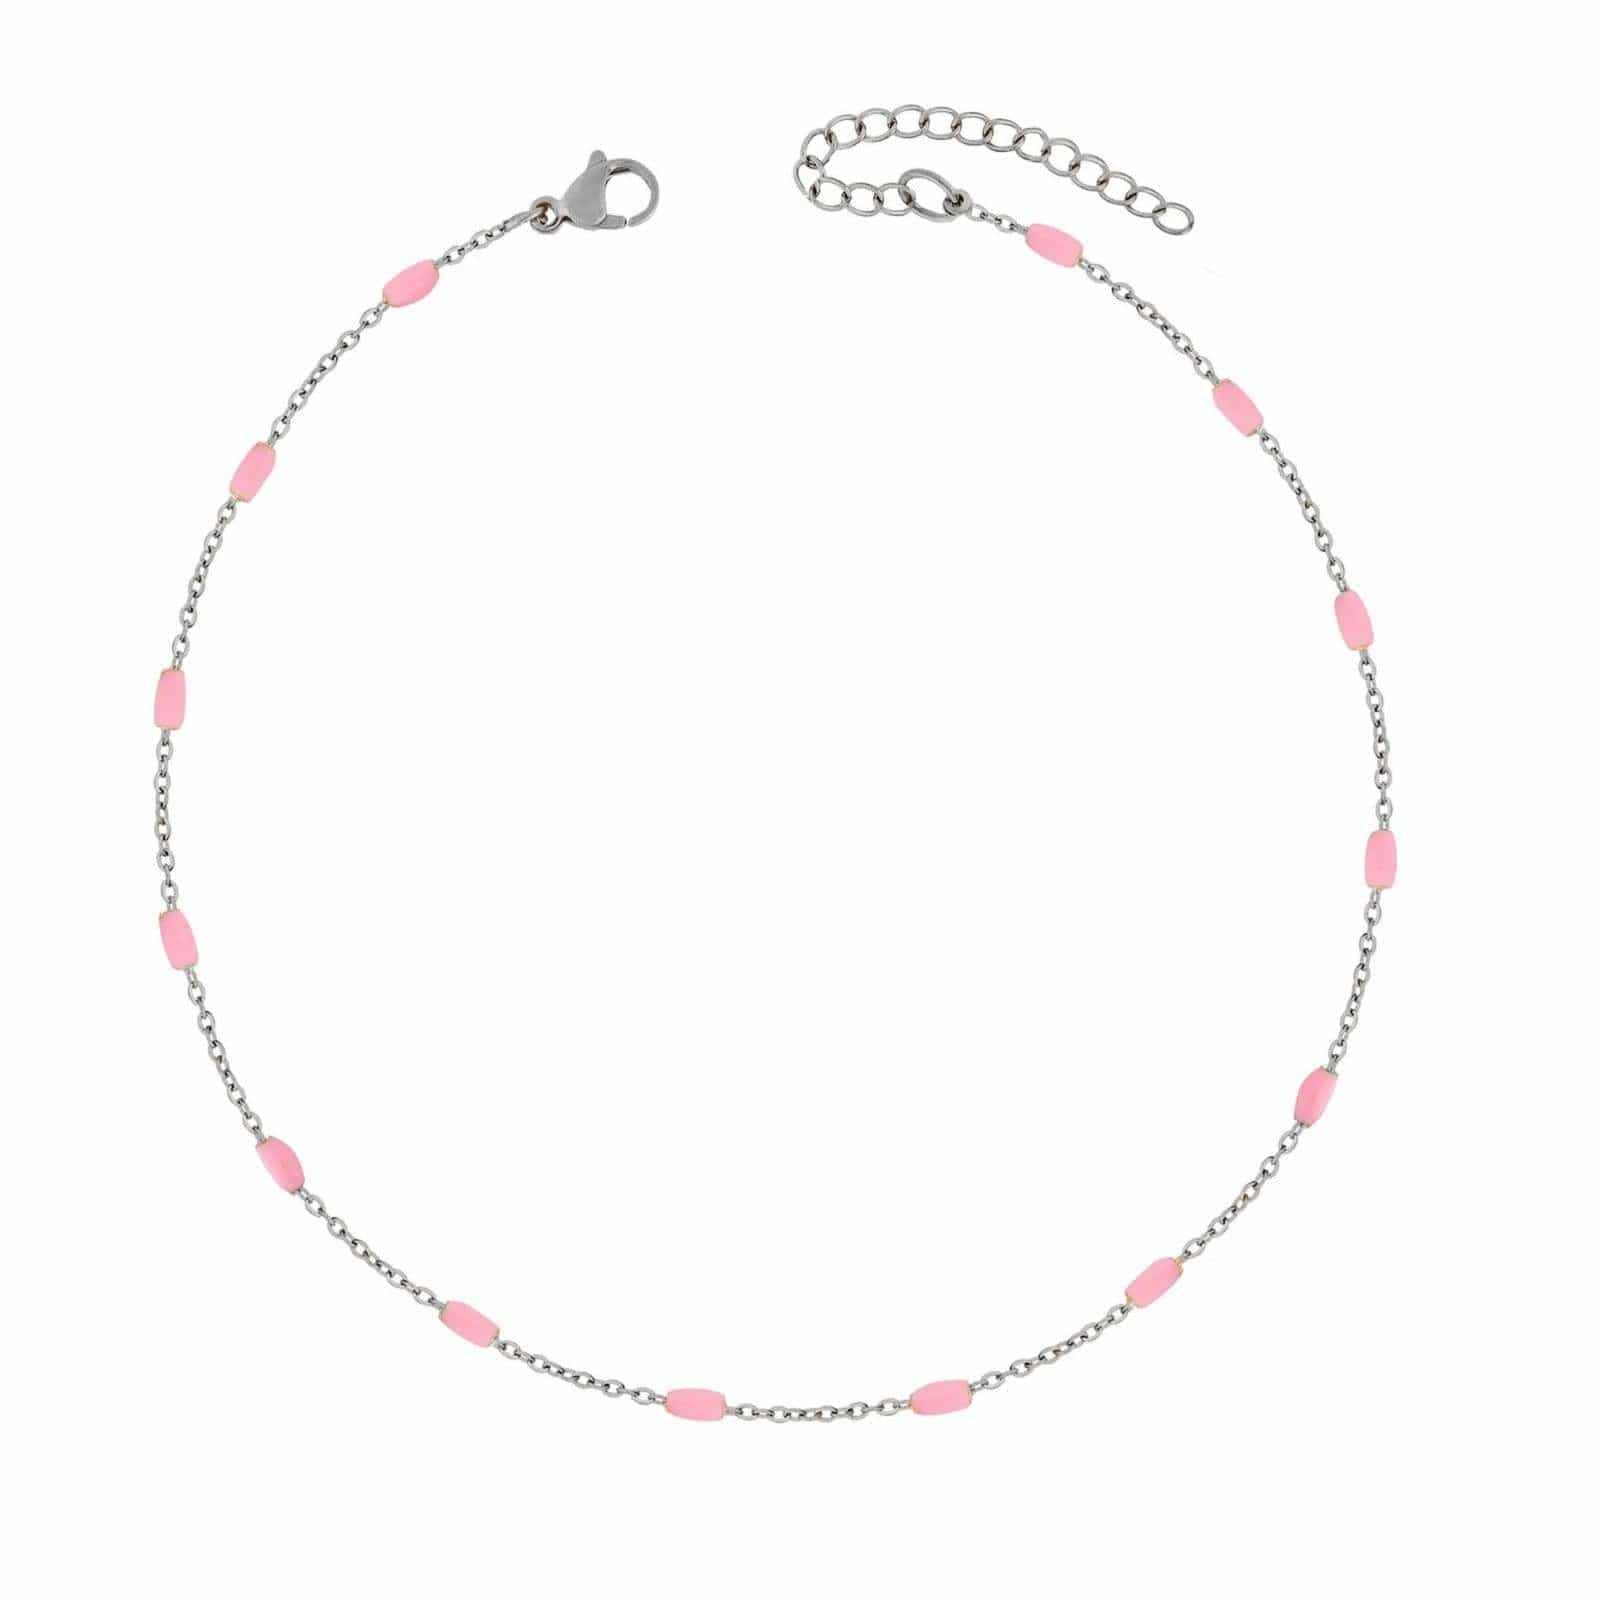 BohoMoon Stainless Steel Seabreeze Anklet Silver / Pink